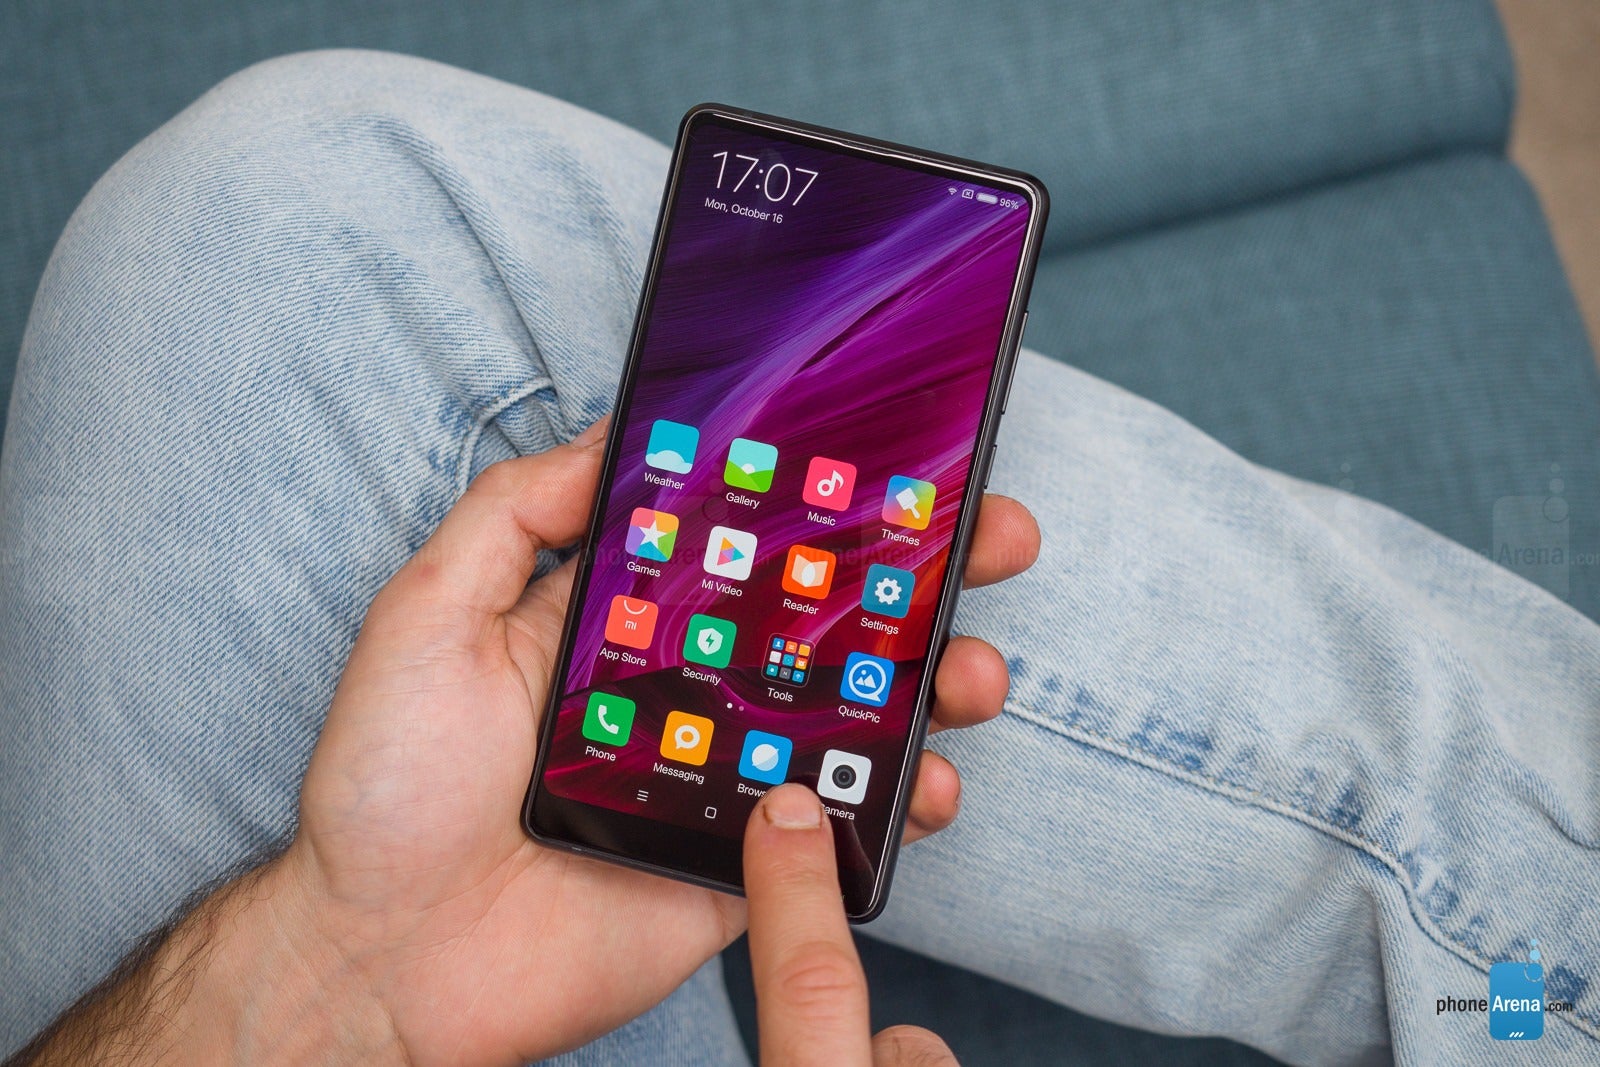 Xiaomi to add iPhone X-like &quot;full display gestures&quot; to Mi MIX and Redmi 5 series phones